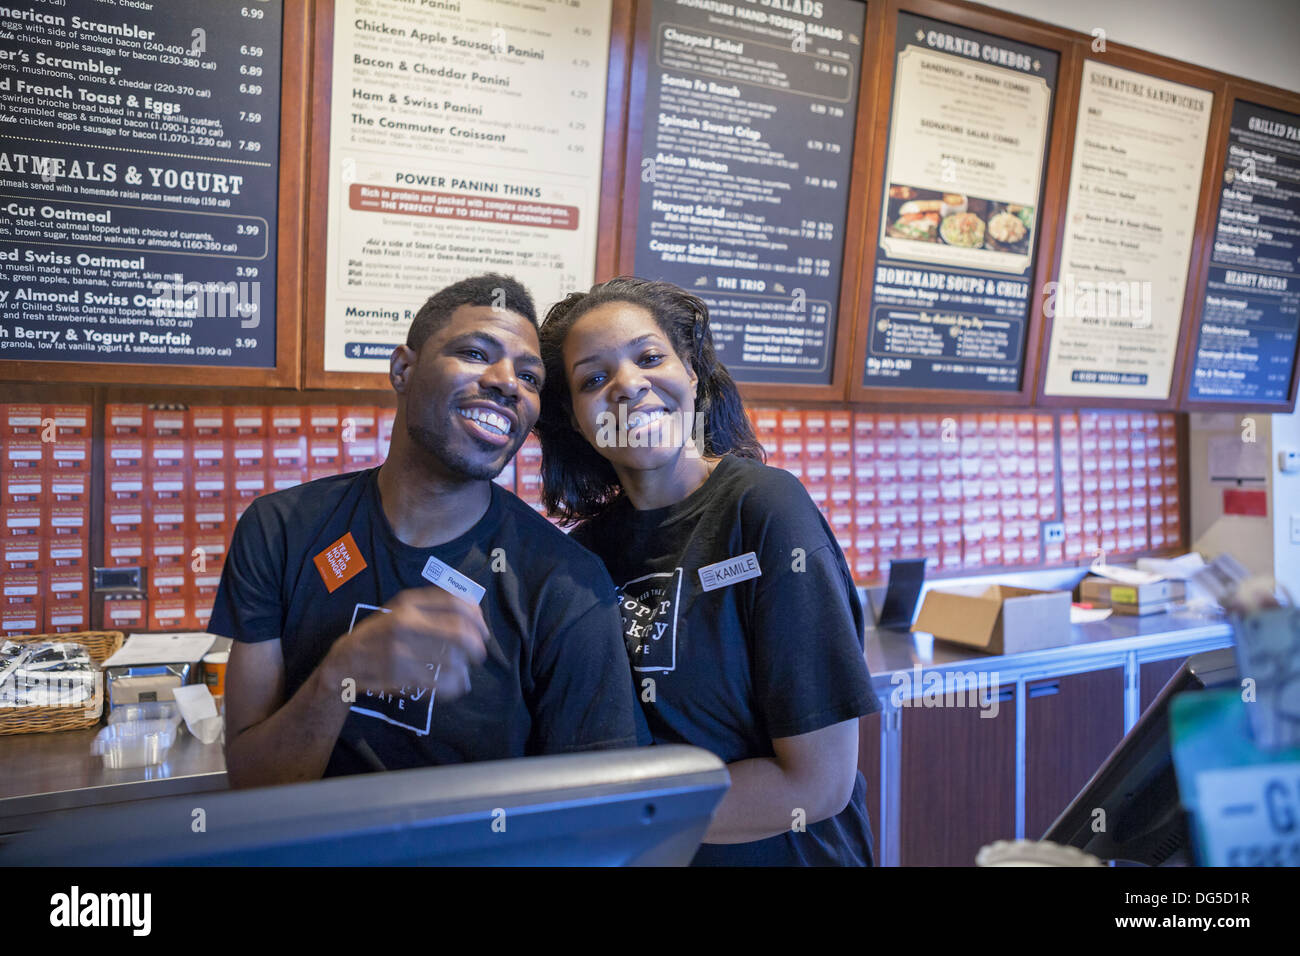 A man and woman happily pose while working at a bakery in Chicago. Stock Photo